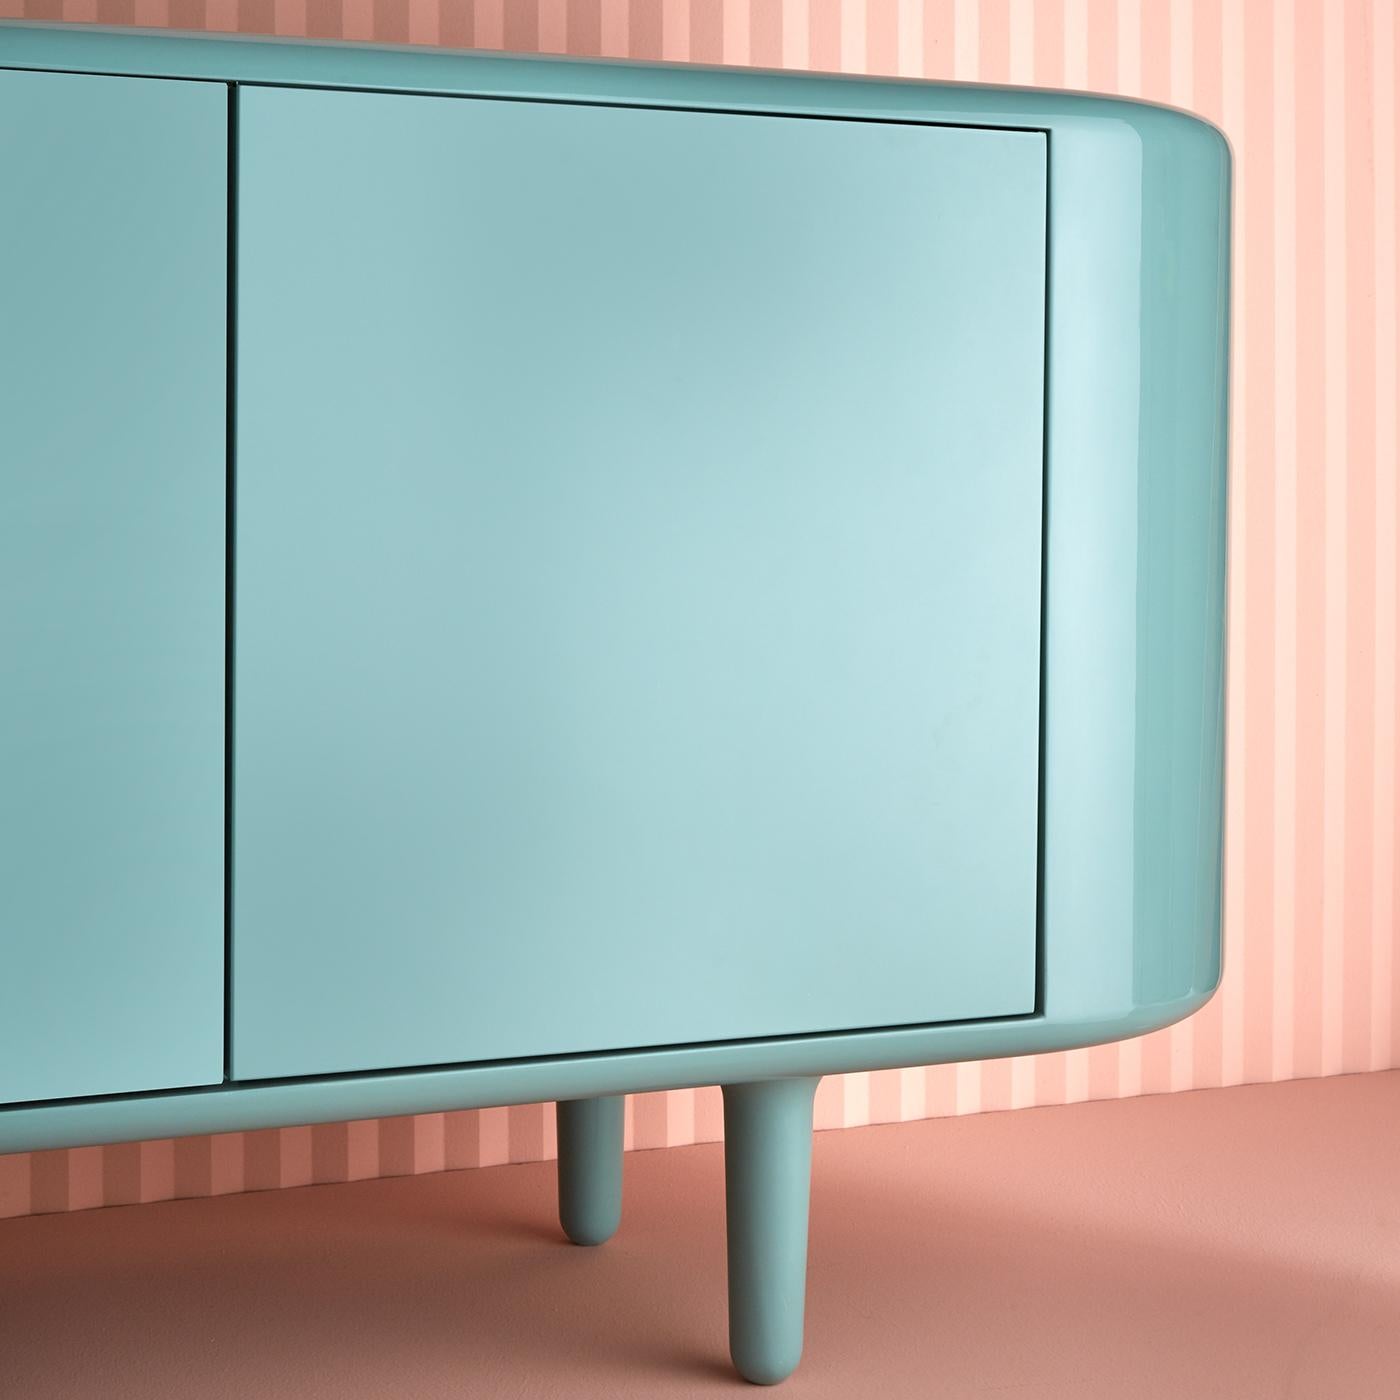 The distinctive design of the famous Italian high-speed express train ETR 300 (aka Settebello) is the inspiration behind this cabinet, whose well-balanced proportions and soft, rounded lines are the perfect fit for a modern home. Supported by four